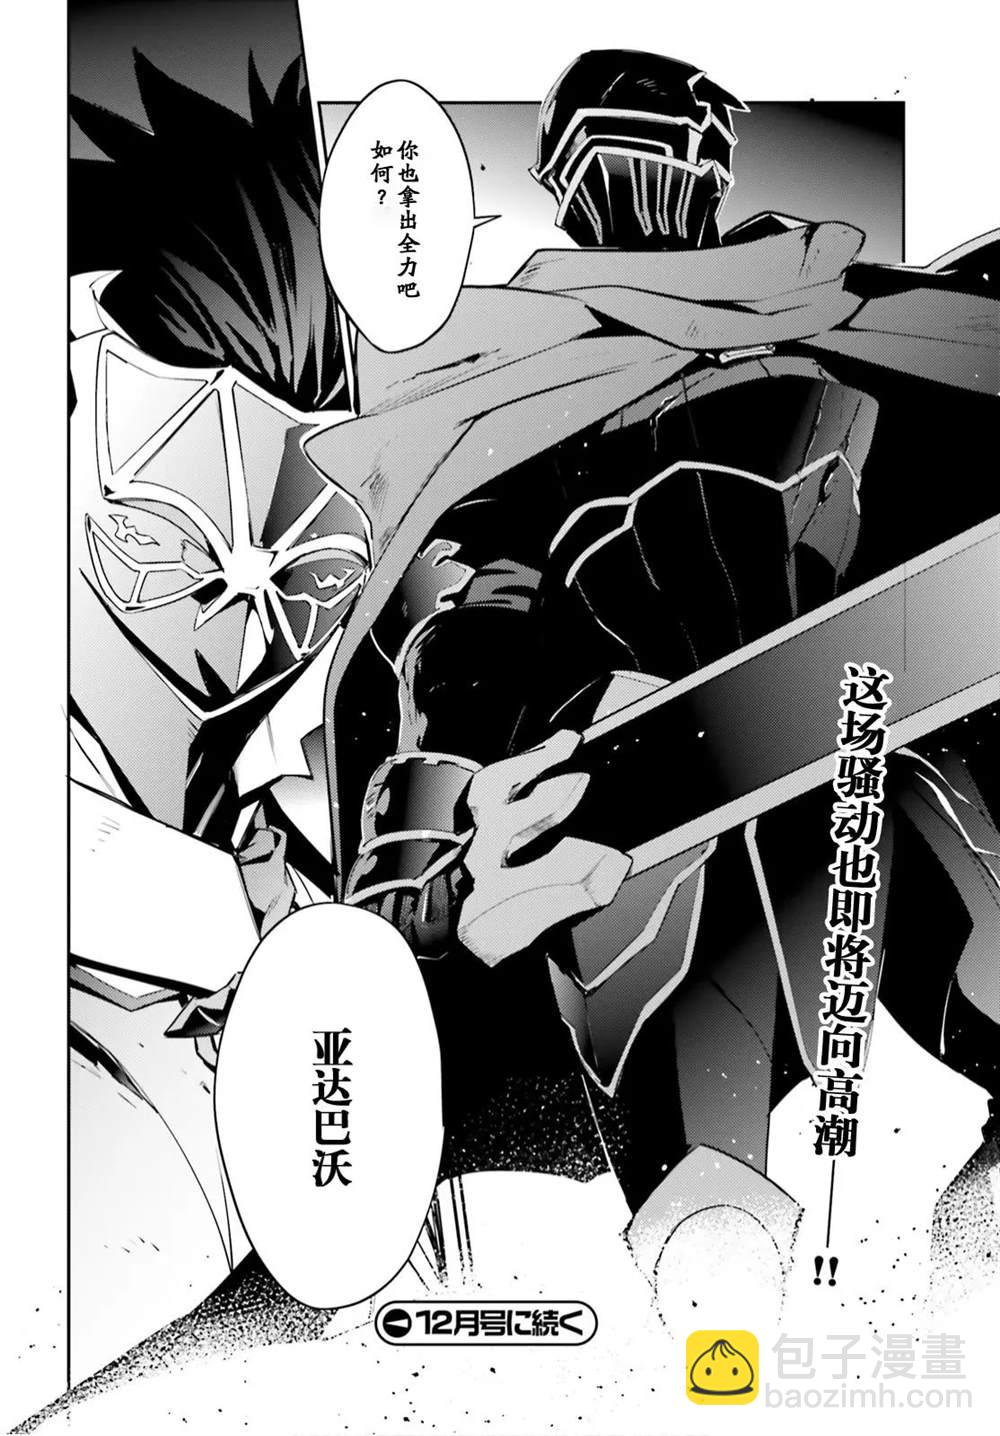 OVERLORD - 第51話 - 3